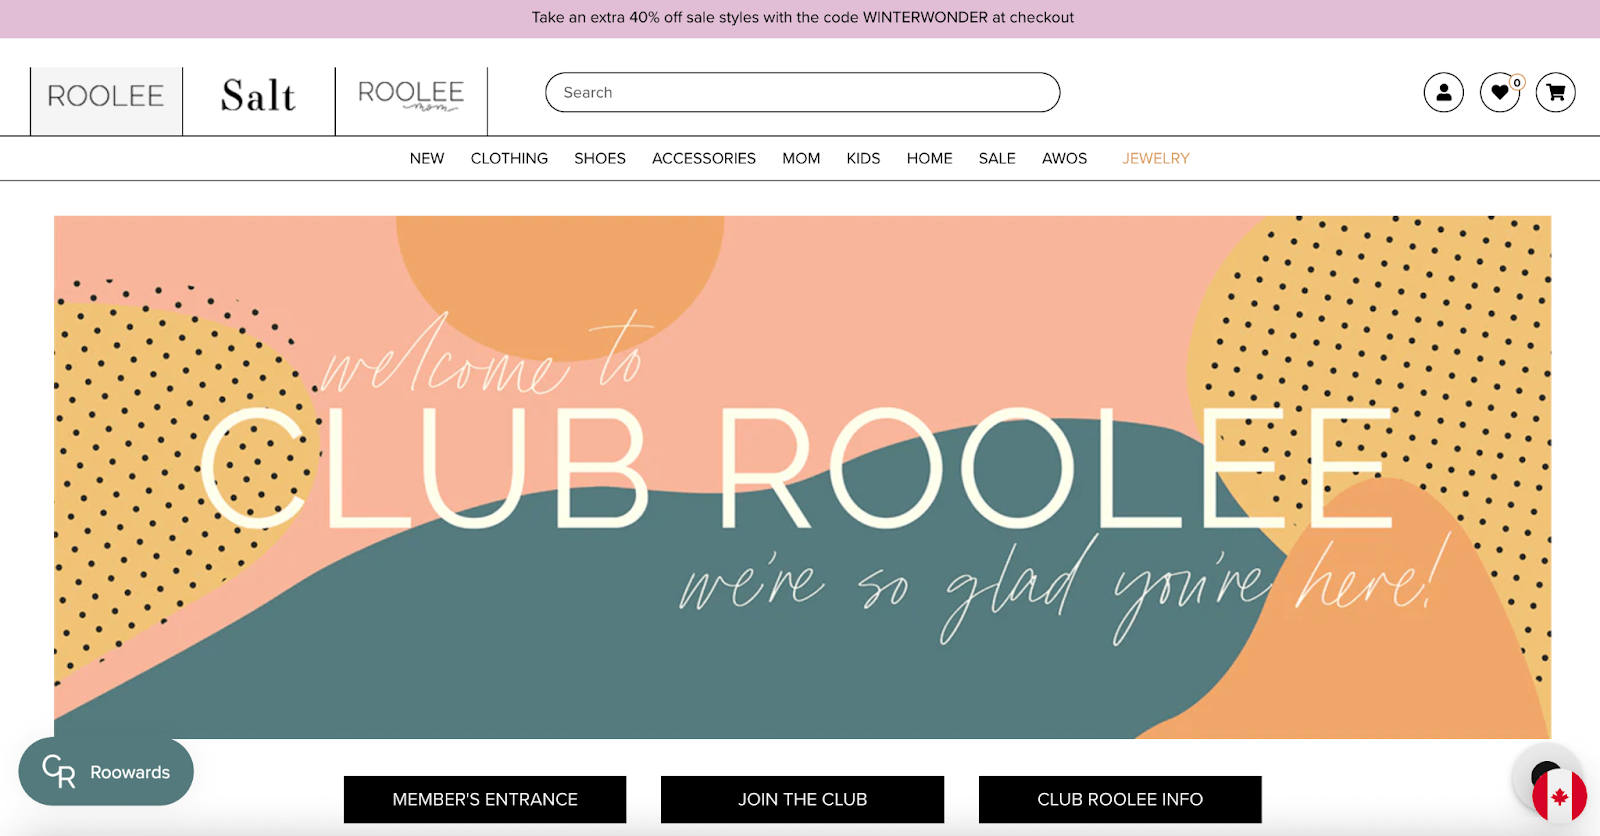 Fashion Industry Loyalty Program Examples–A screenshot from ROOLEE’s rewards program explainer page. The page background is a multicolored abstract design. The text reads, “Welcome to Club ROOLEE. We’re so glad you’re here!” There are buttons for logging in, signing up, or getting more information. 